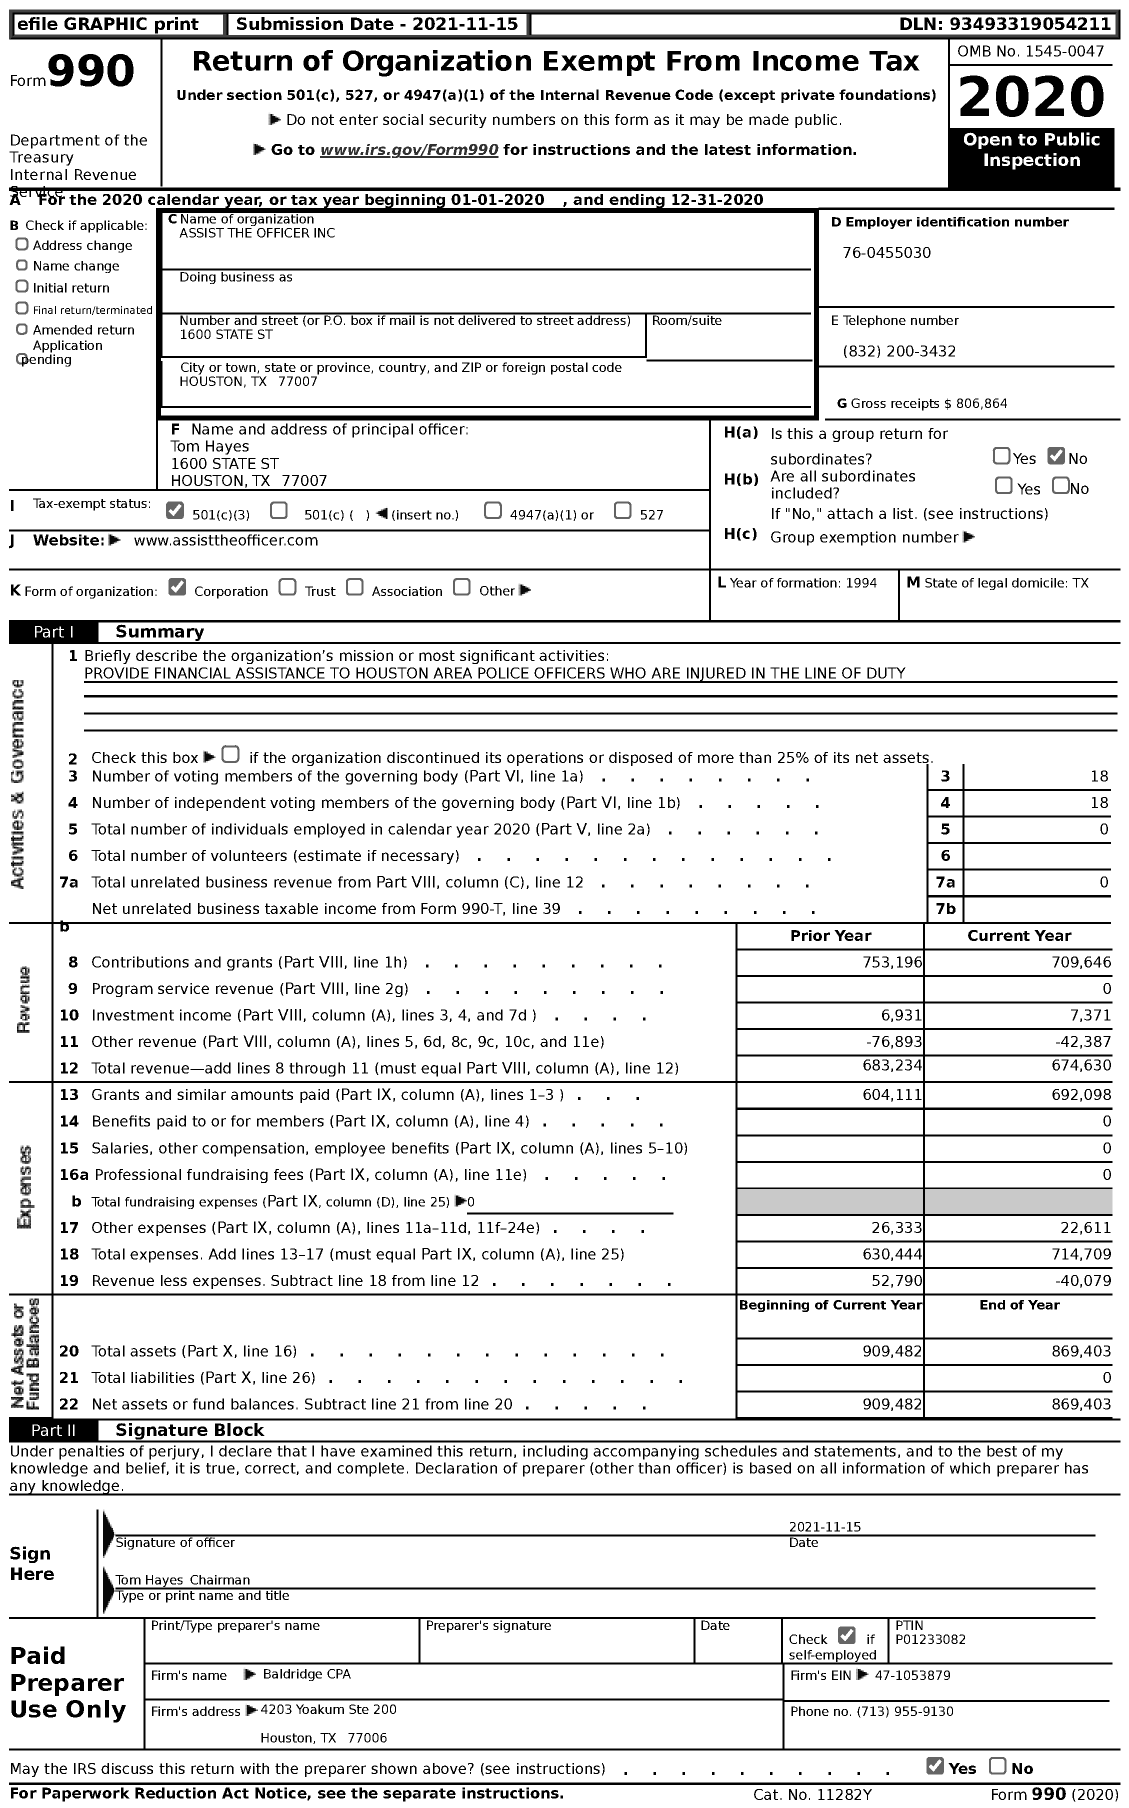 Image of first page of 2020 Form 990 for Assist the Officer